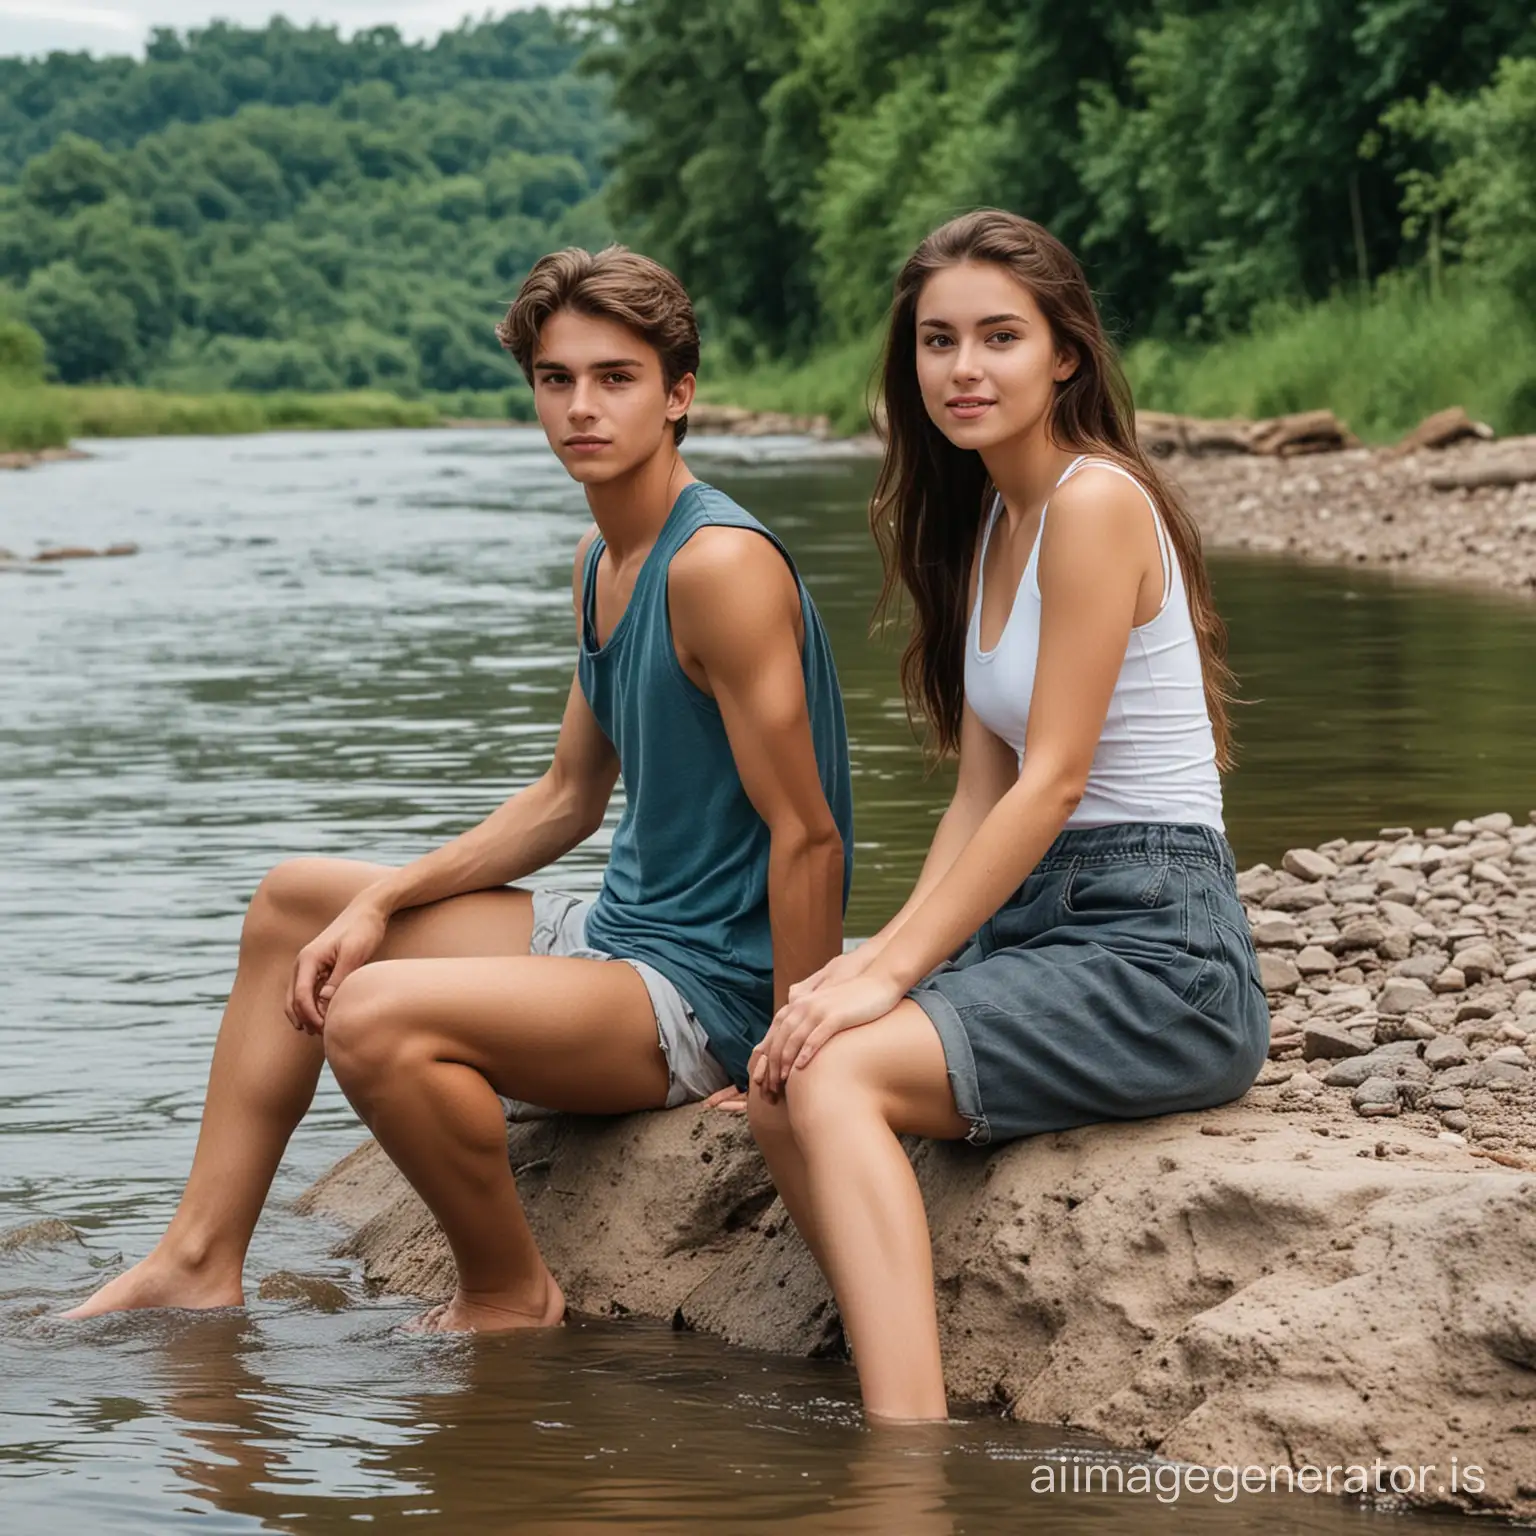 Youthful-Duo-Relaxing-by-Serene-Riverbank